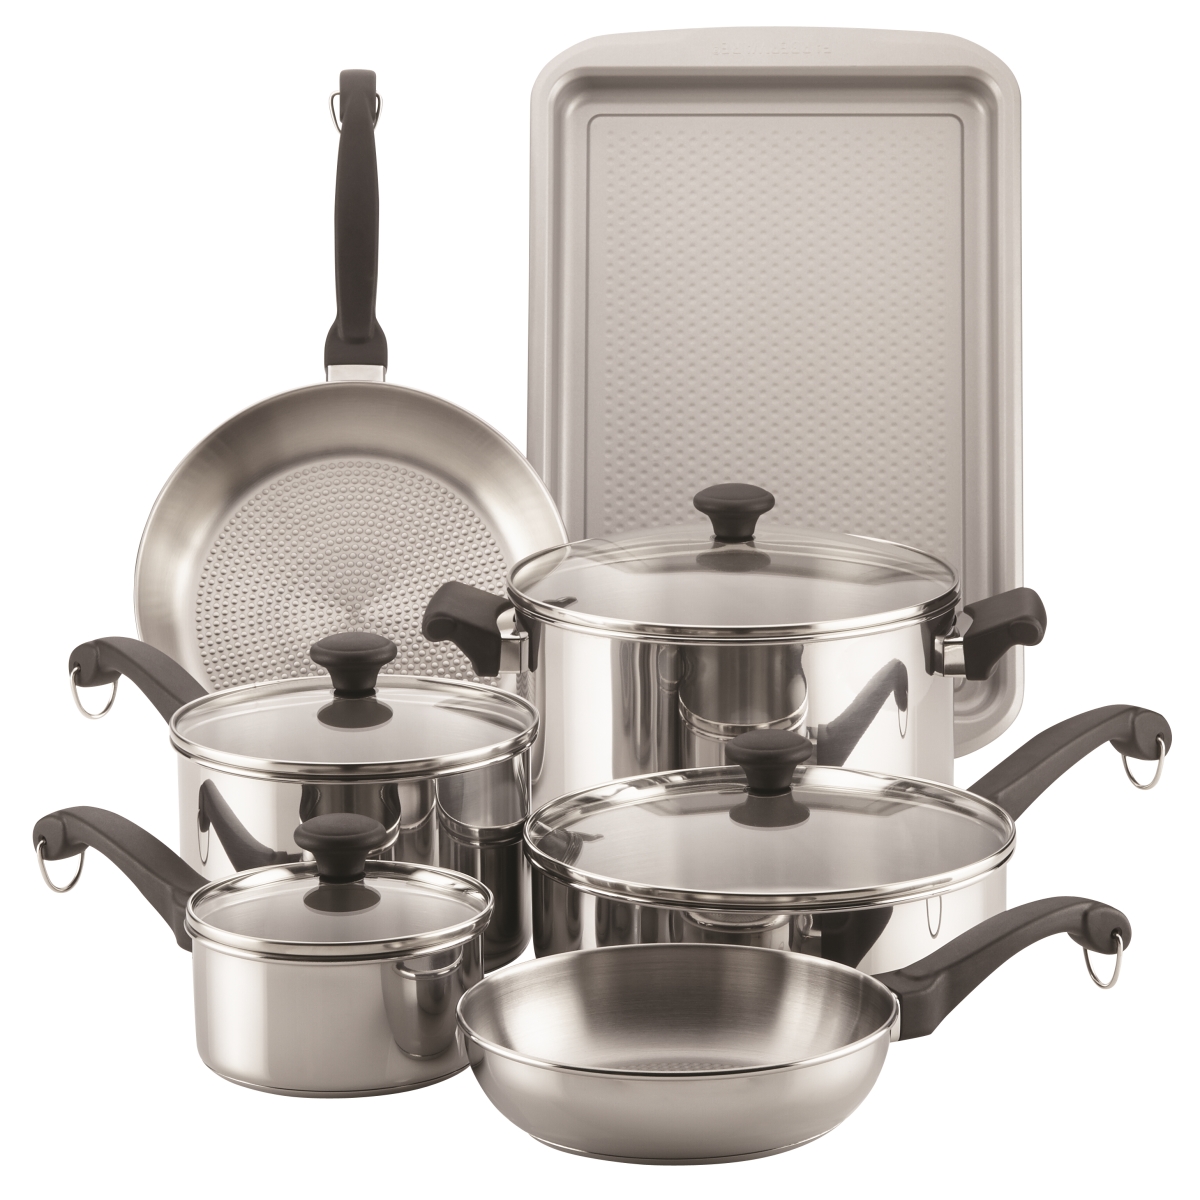 Picture of Farberware 70217 Classic Traditions Stainless Steel Cookware Set - 12 Piece